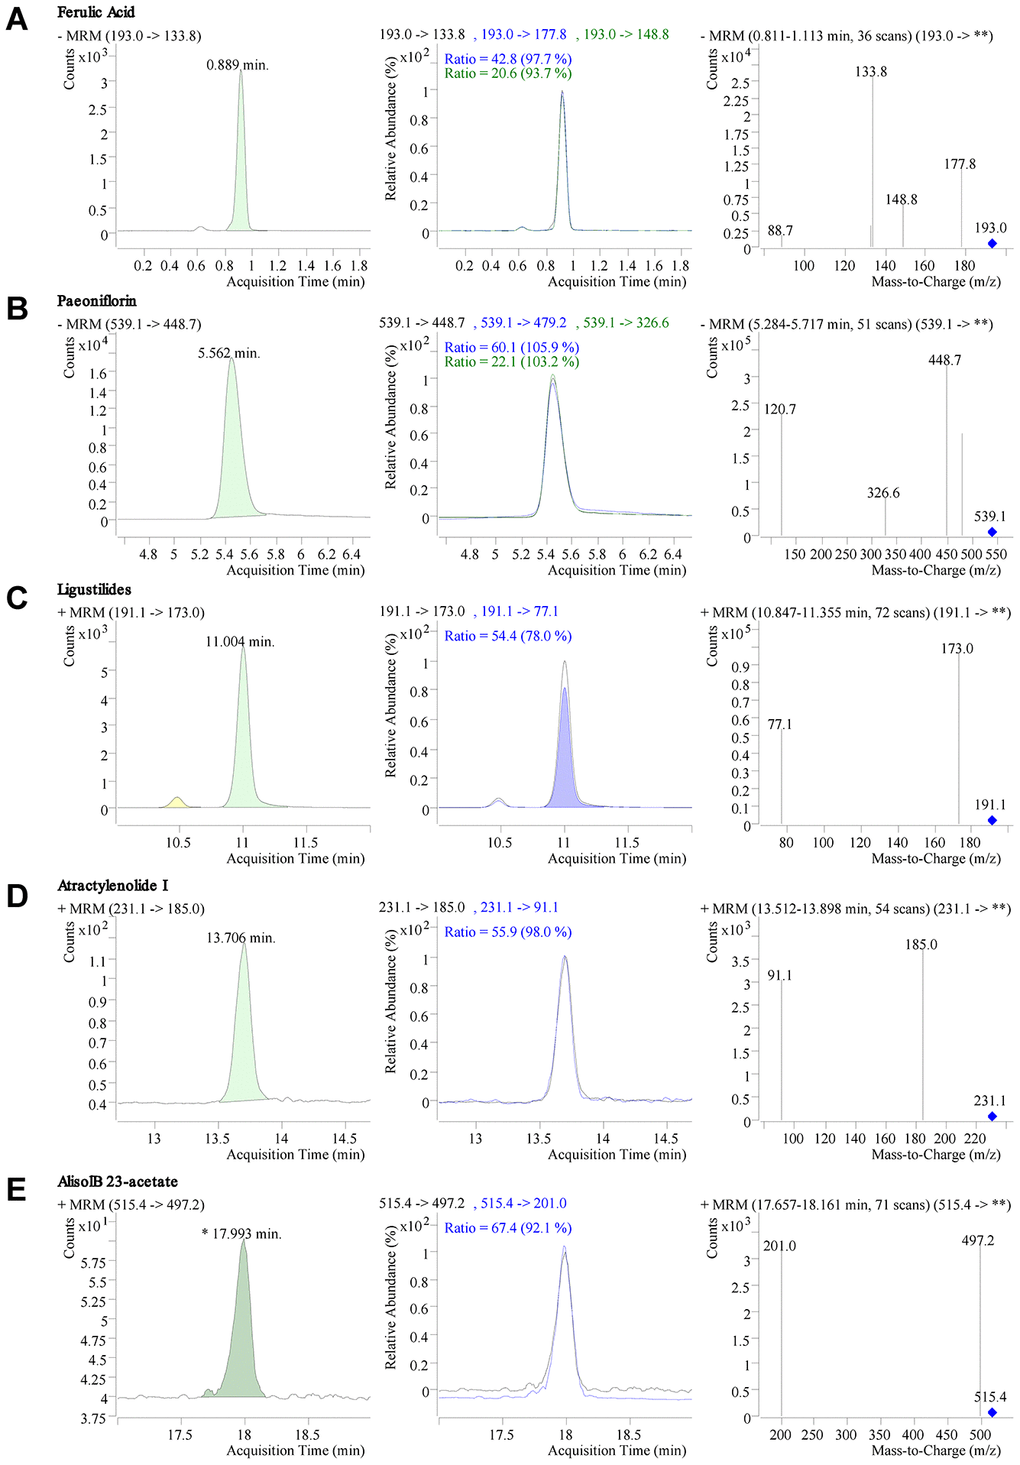 LC-MS/MS chromatogram and mass spectrometry of Danggui-Shaoyao-San (DSS). (A–E) Retention time, chromatogram, and mass spectrogram of ferulic acid (A), paeoniflorin (B), ligustilide (C), atractylenolide I, (D) and alisol B 23-acetate (E) in DSS.